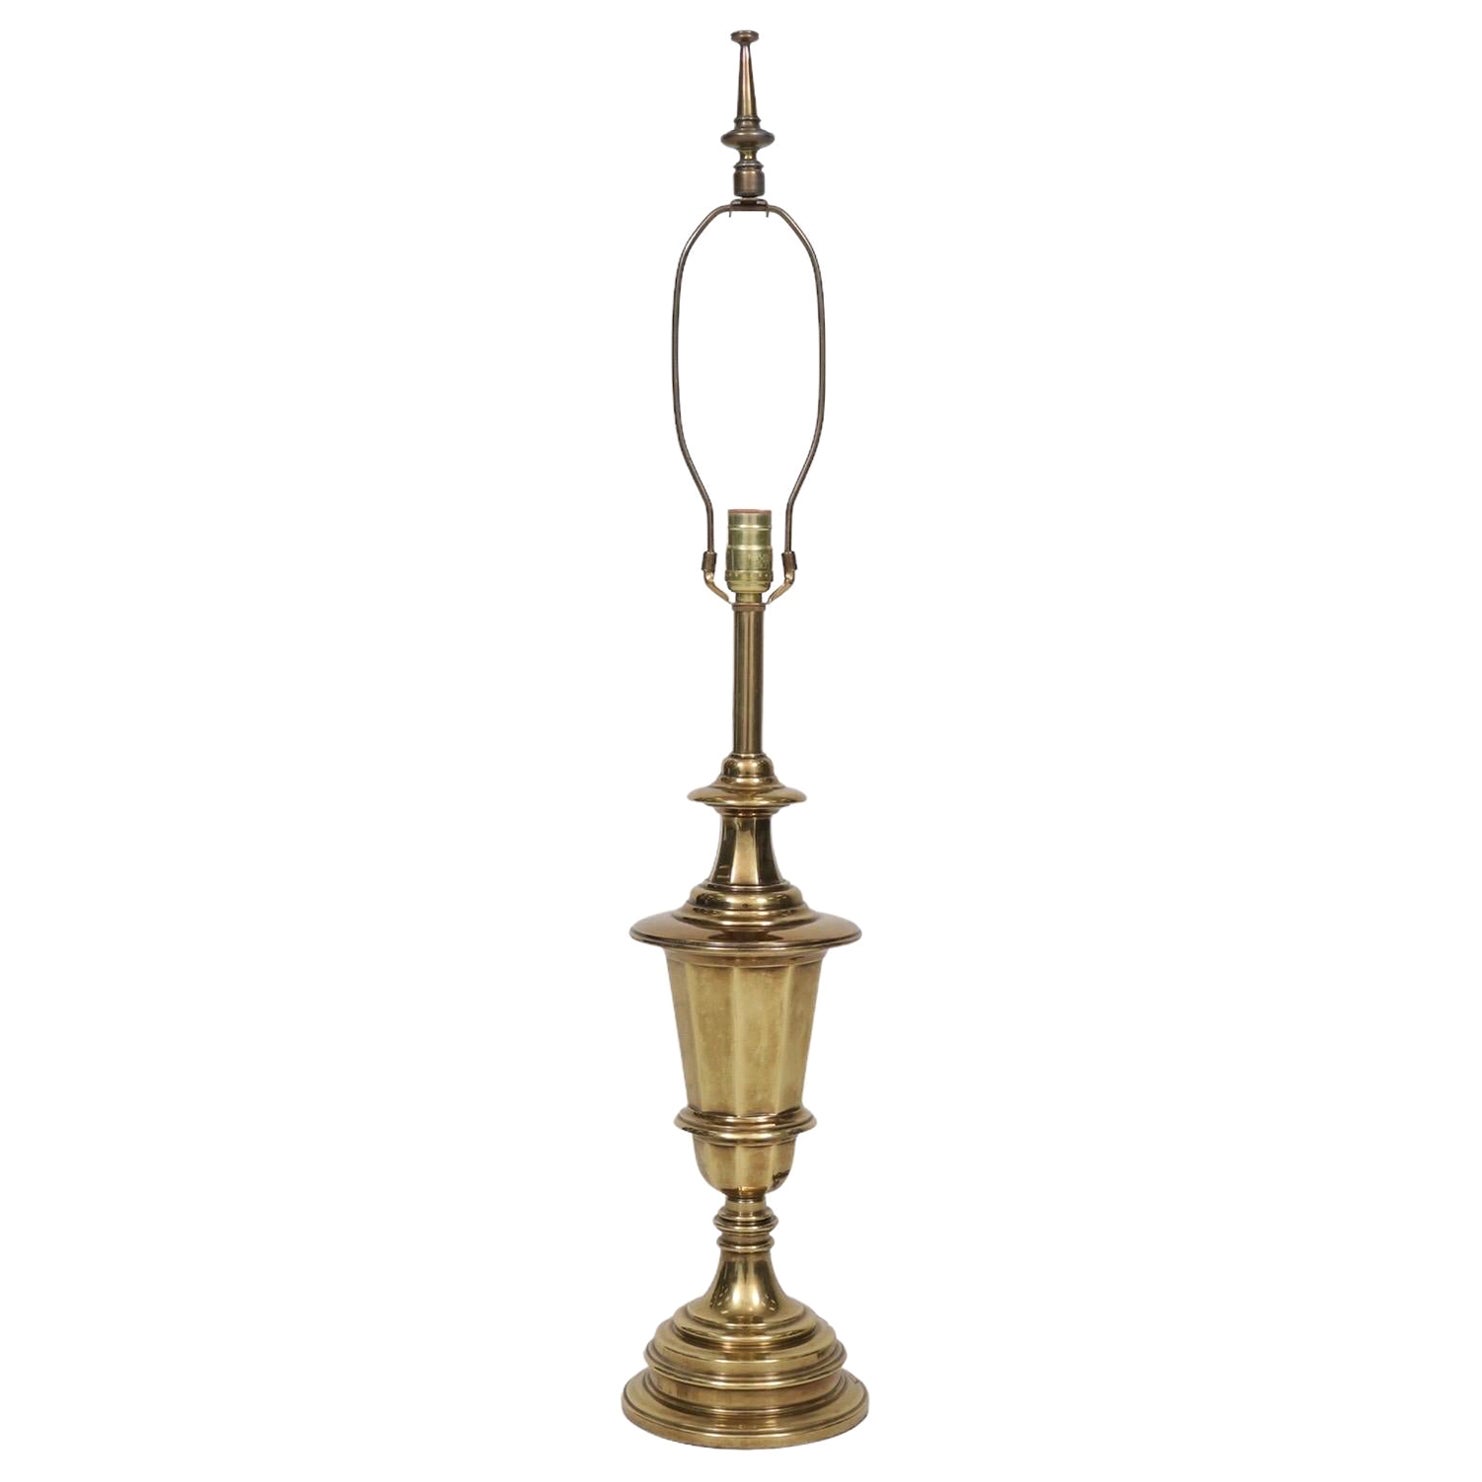 Turned Brass Table Lamp by Stiffel